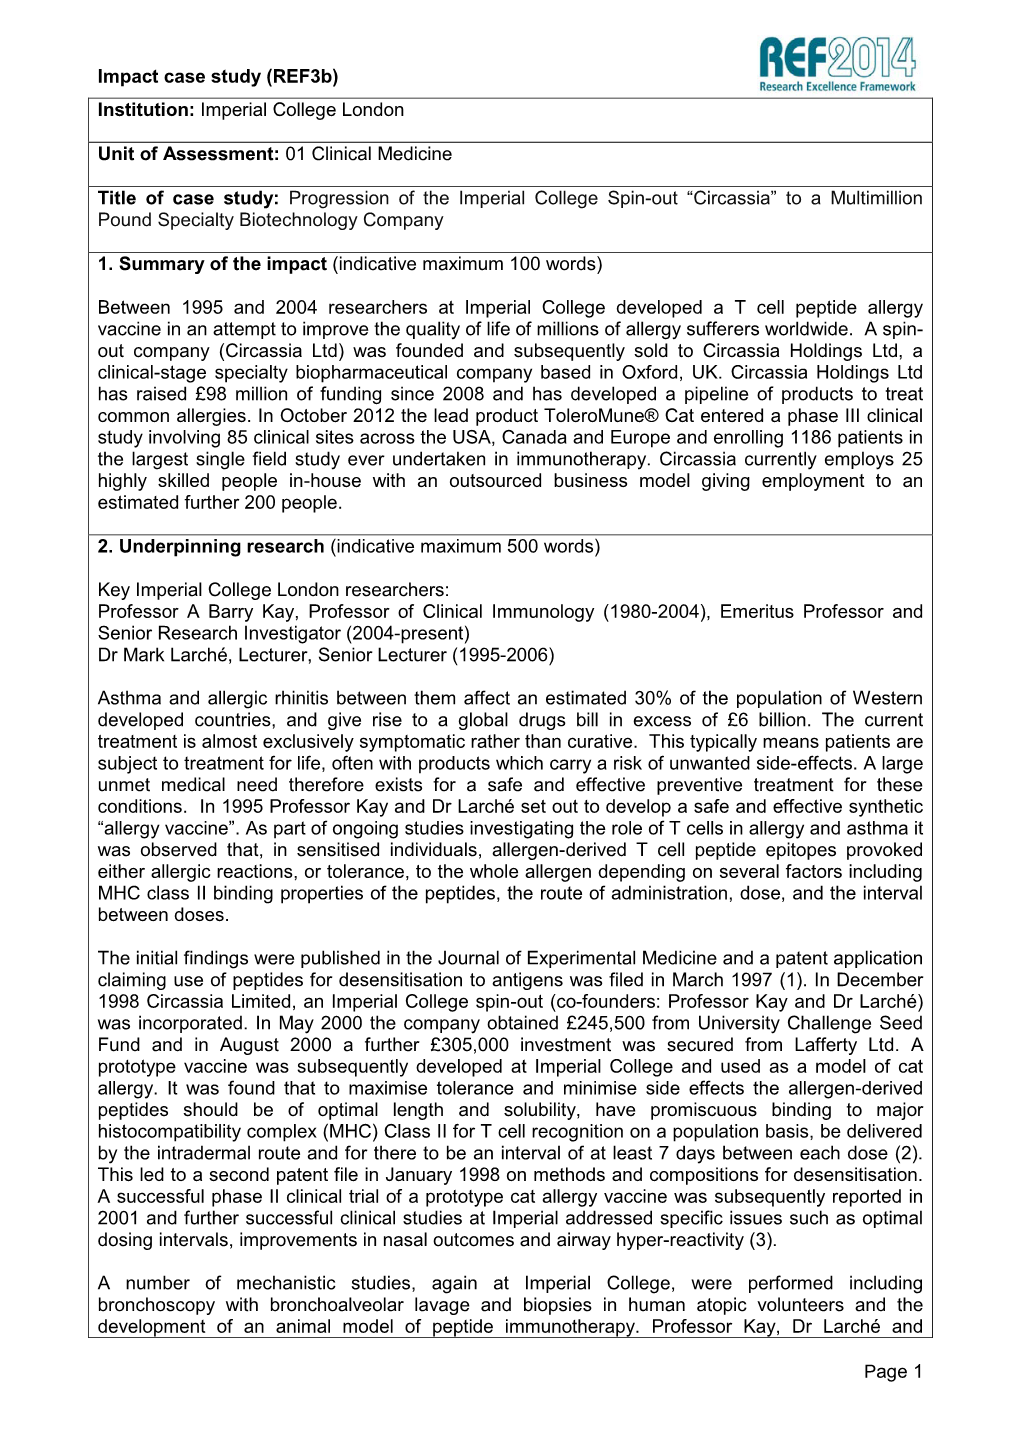 Impact Case Study (Ref3b) Page 1 Institution